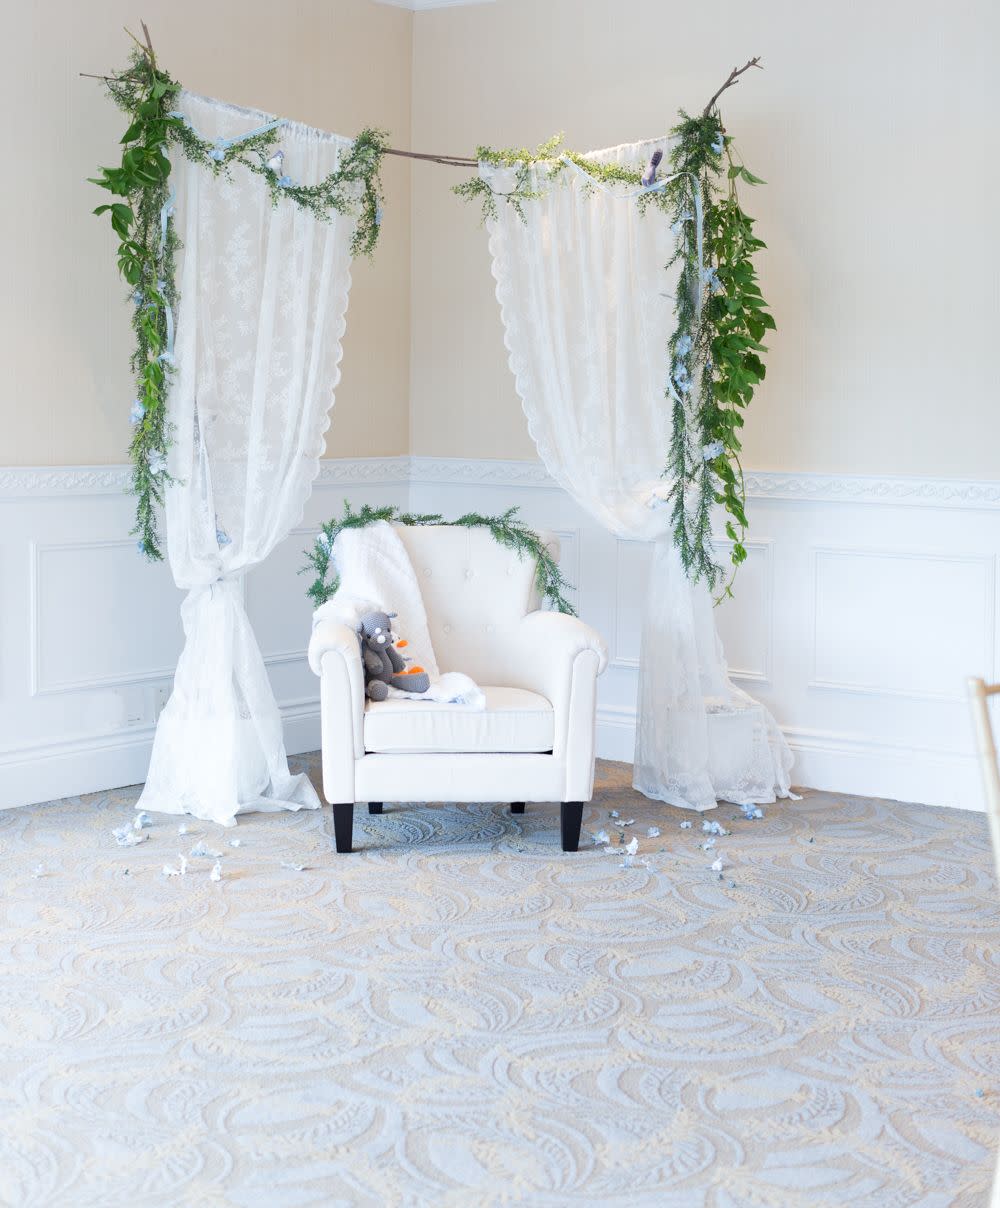 white curtains provide a pretty photo backdrop, a great baby shower idea